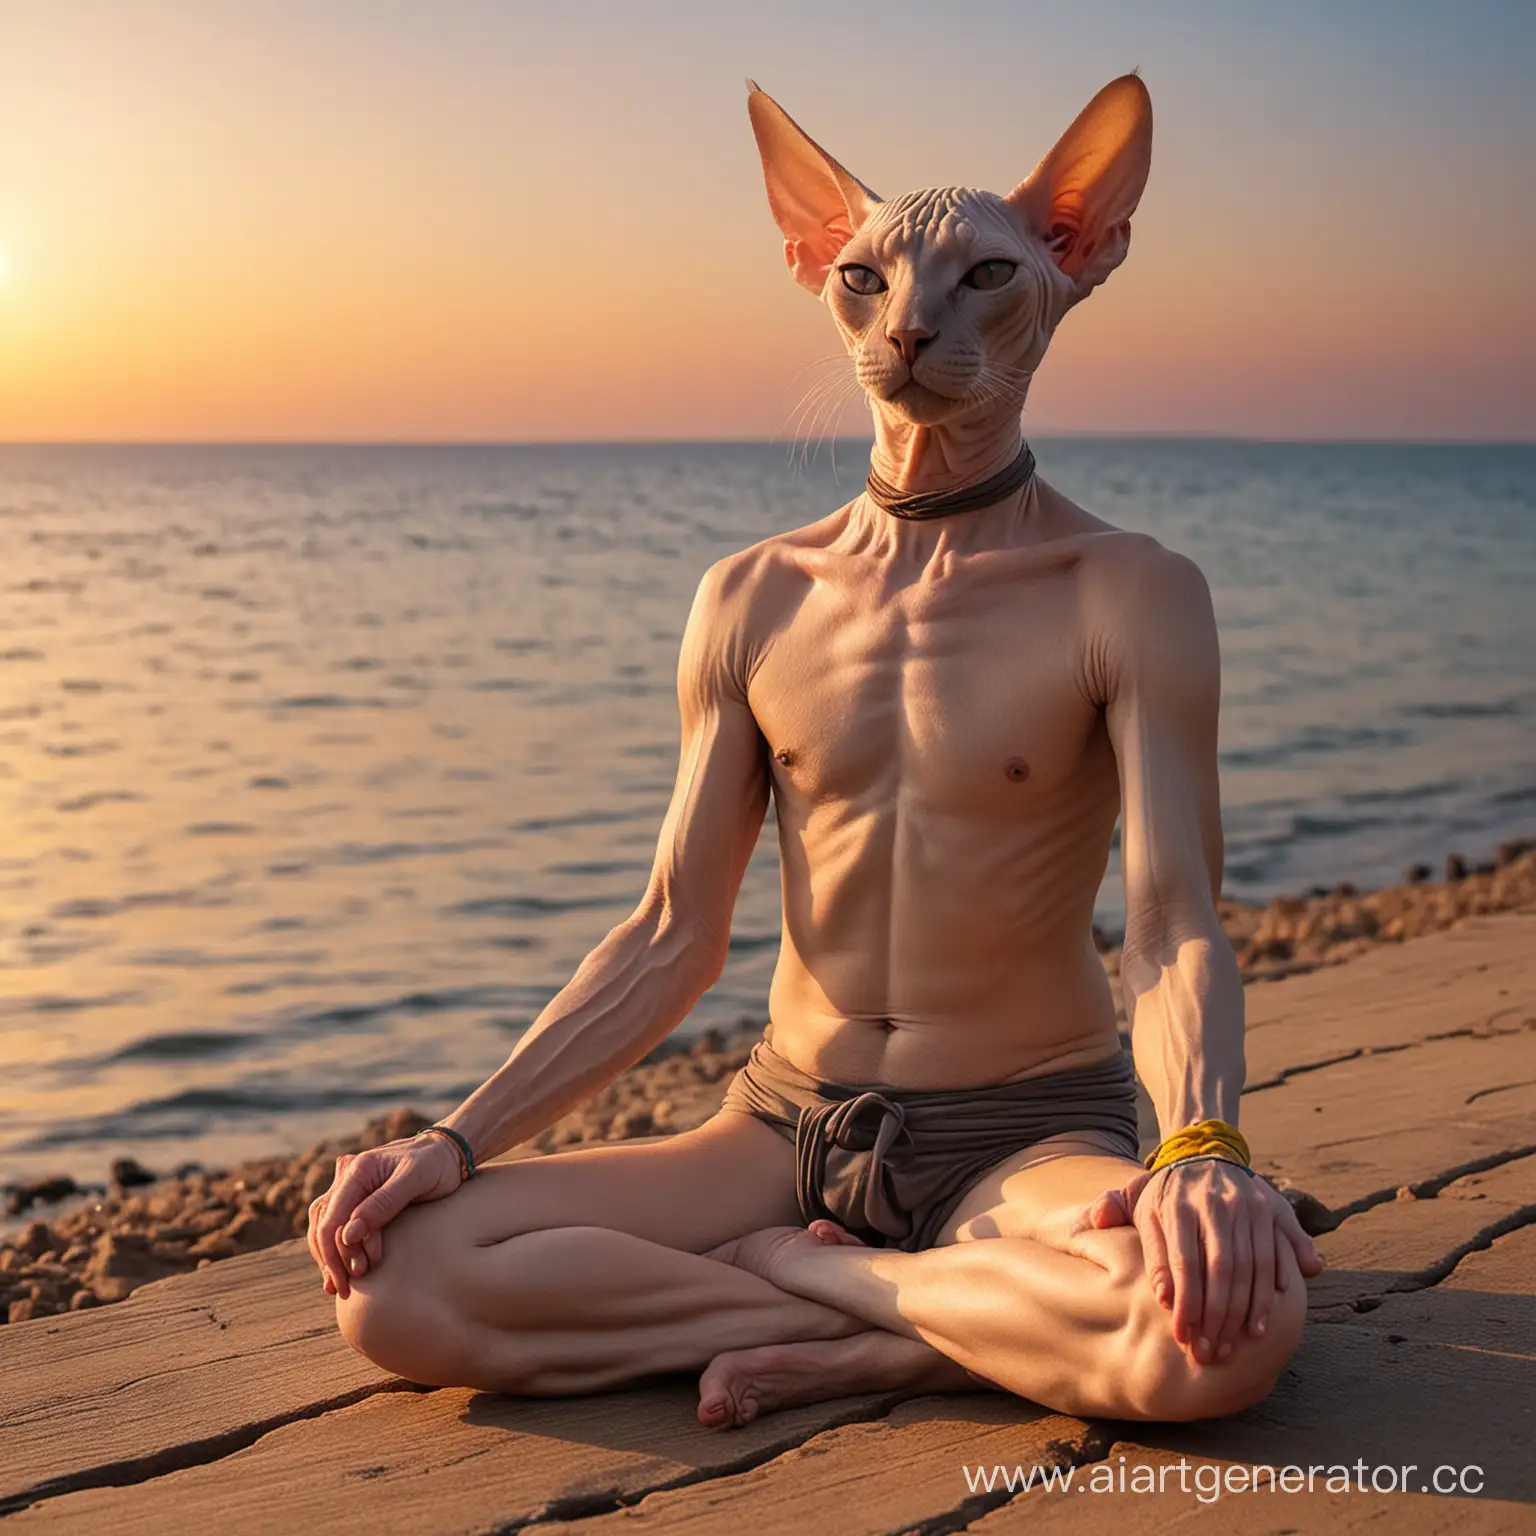 A man-cat of the Sphynx breed, without hair, he has a gray beard, tied with a rubber band, sits in the lotus position and meditates, looking at the sea, evening sunset in the sea, the sun is setting,